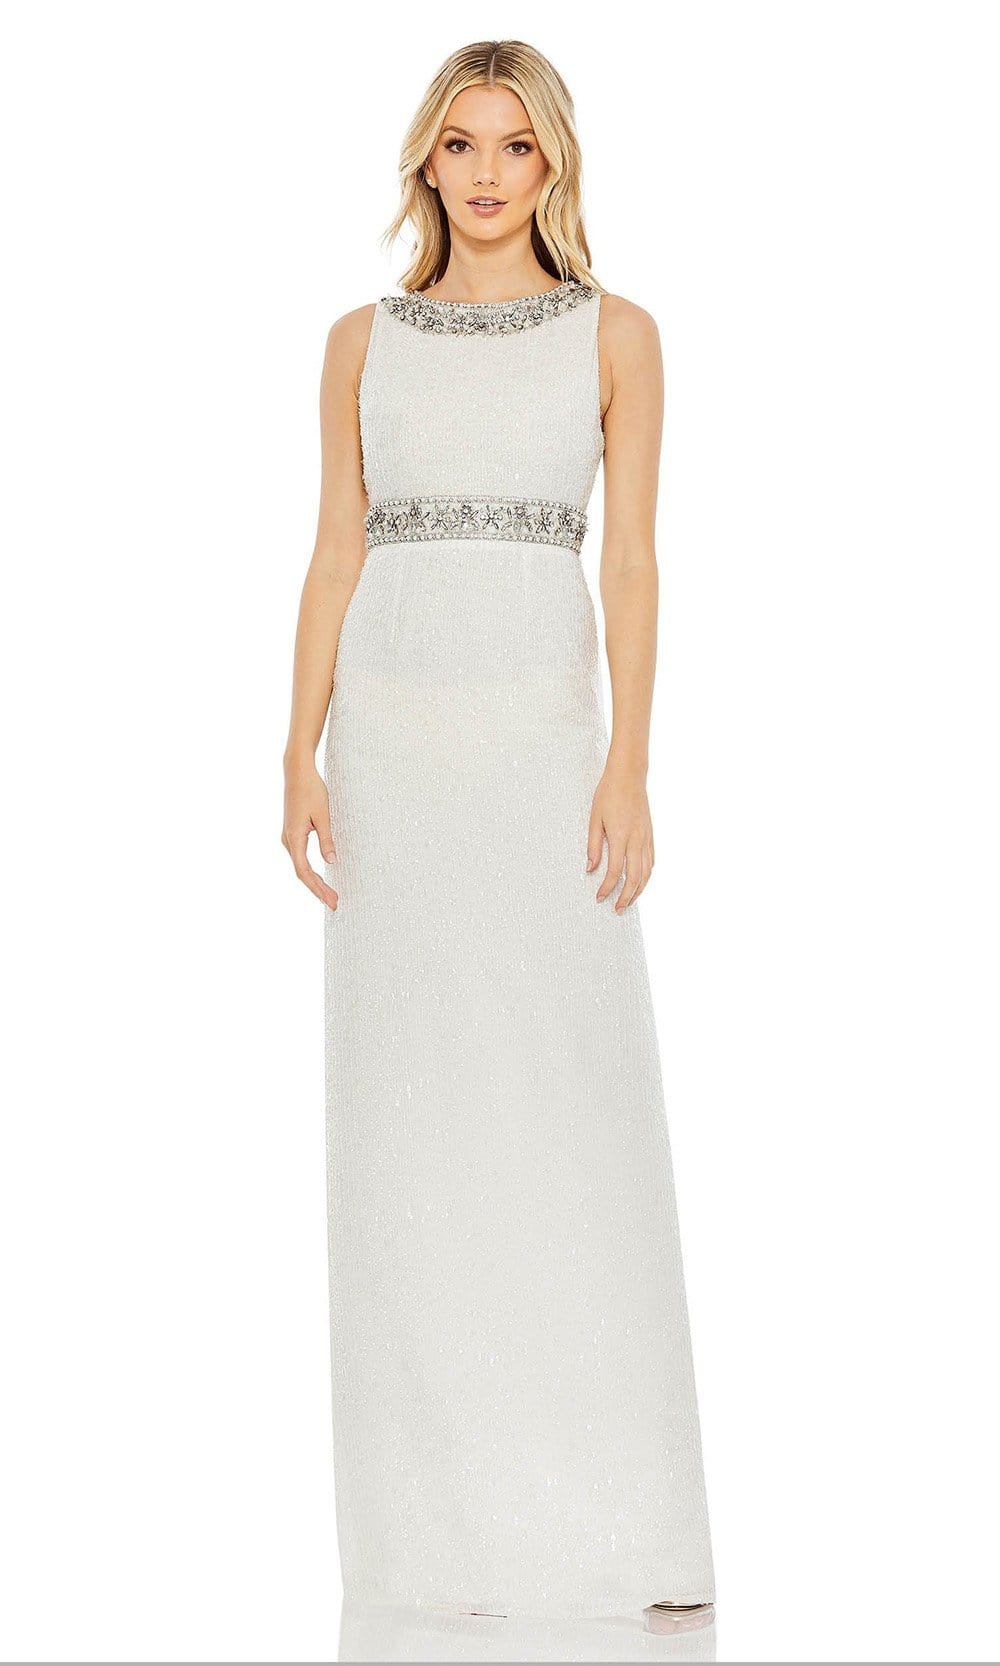 Mac Duggal - 10839 Crystal Ornate Sheath Gown Special Occasion Dress 2 / White